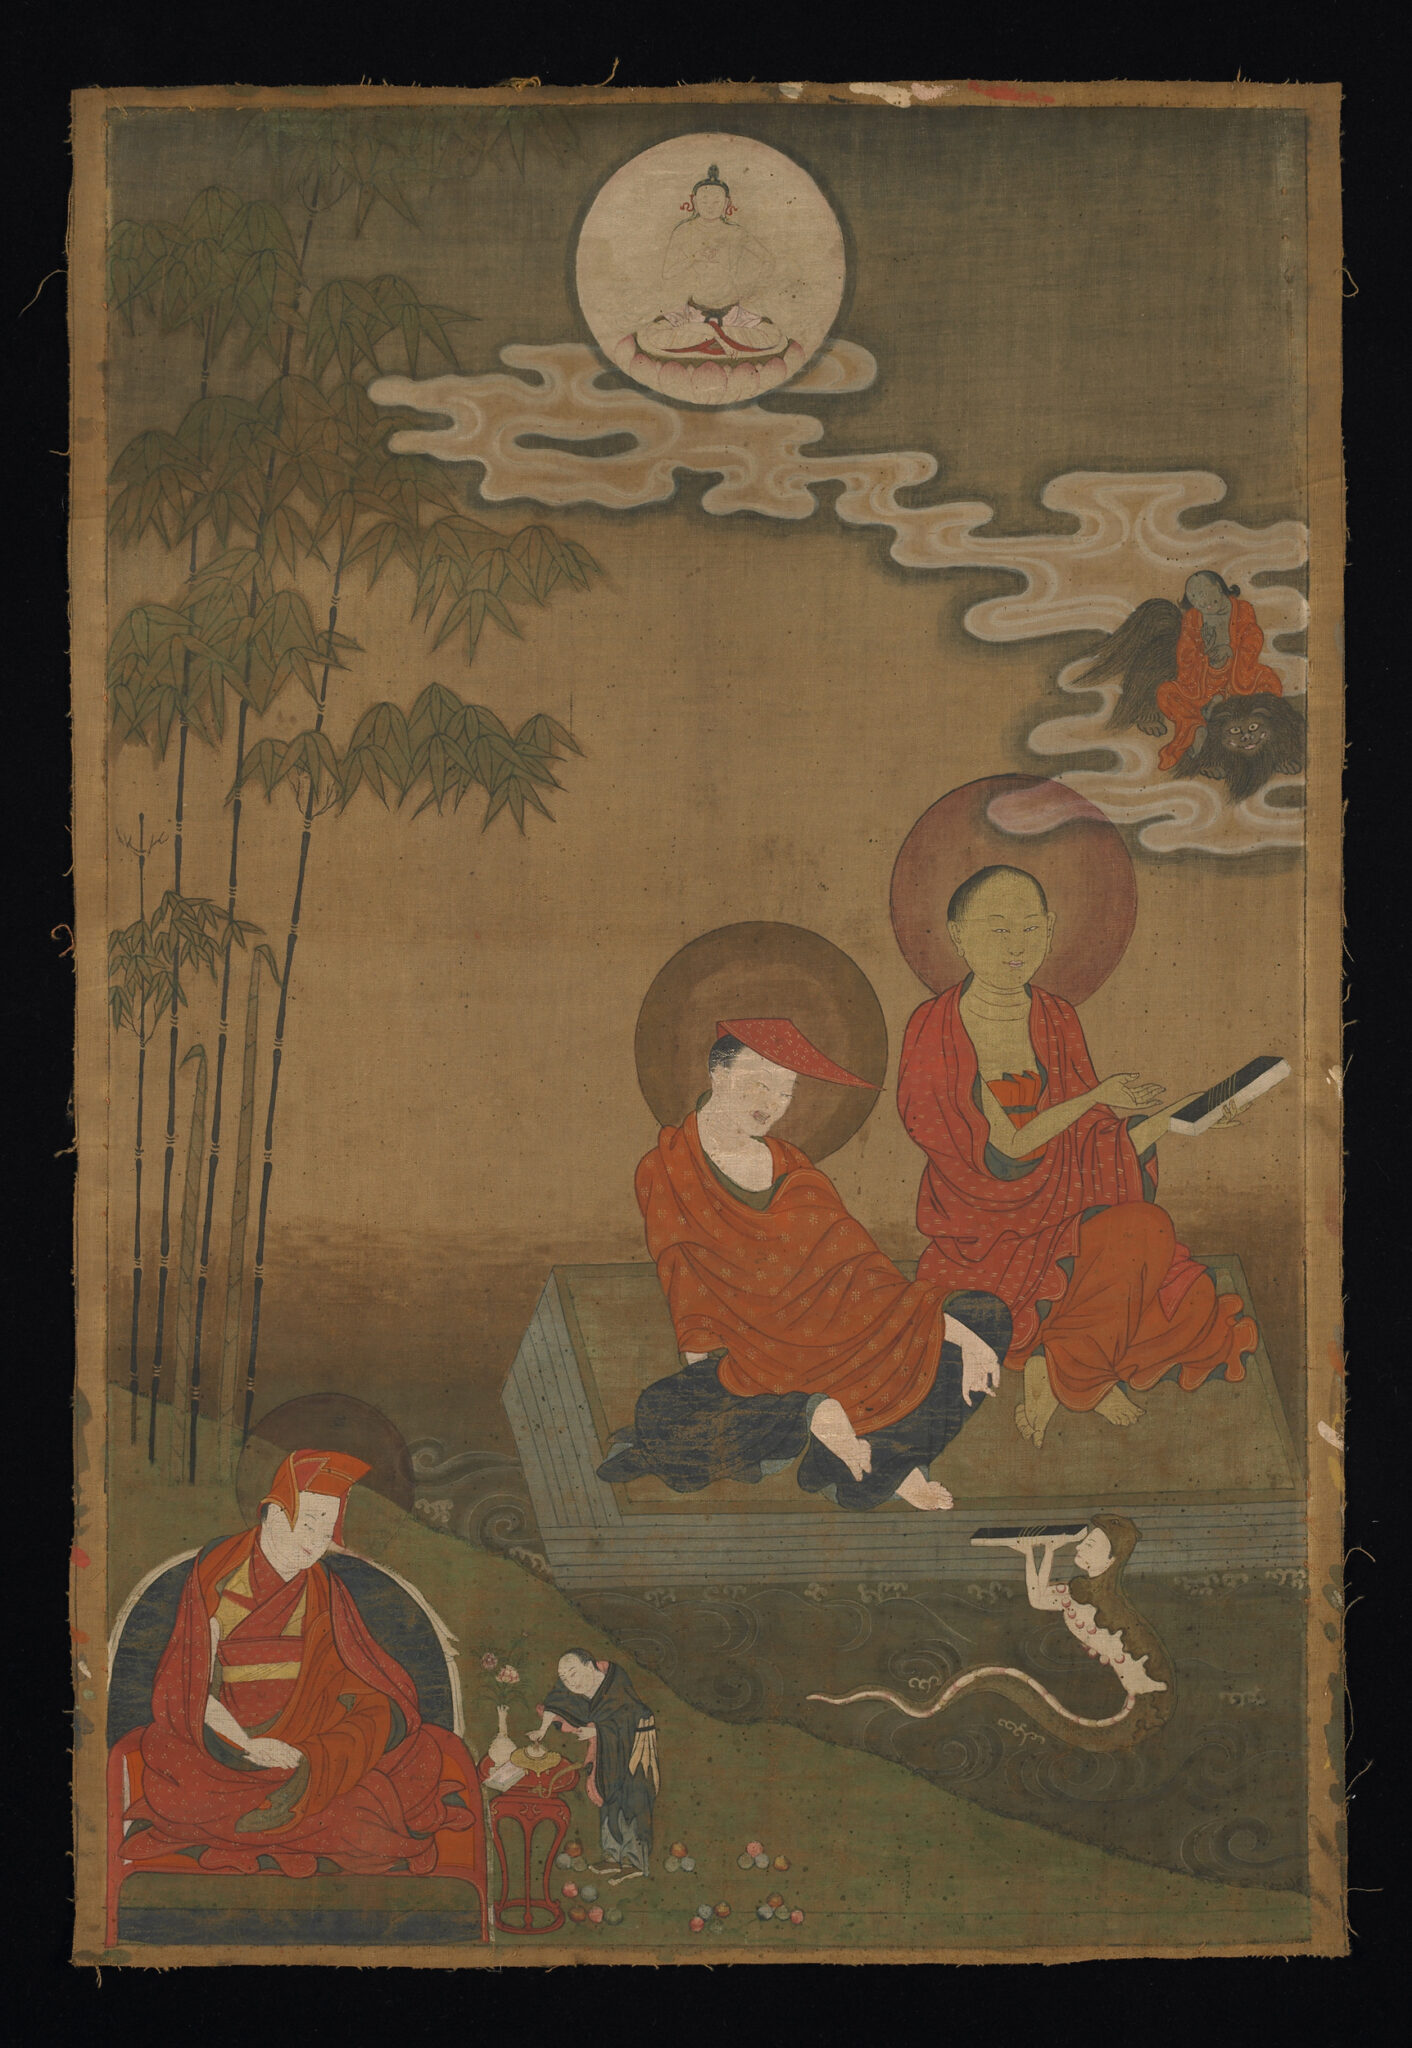 Two philosopher monks seated on water-bound platform underneath vaporous cloud leading to deity portrait